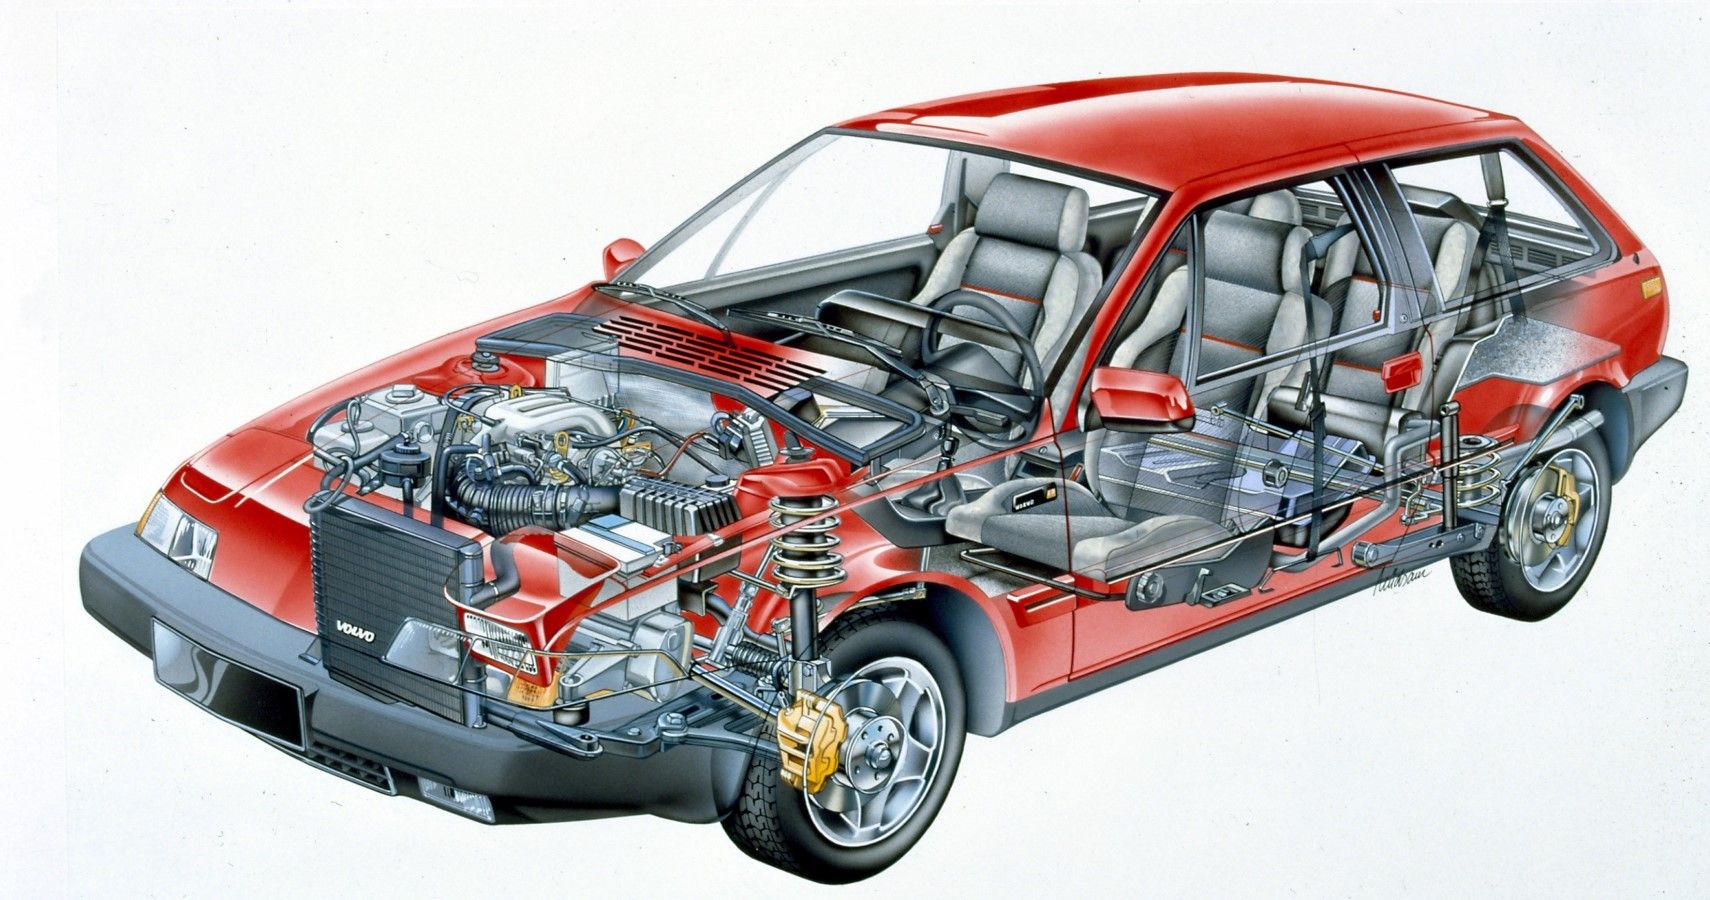 Volvo 480 mechanical components layout